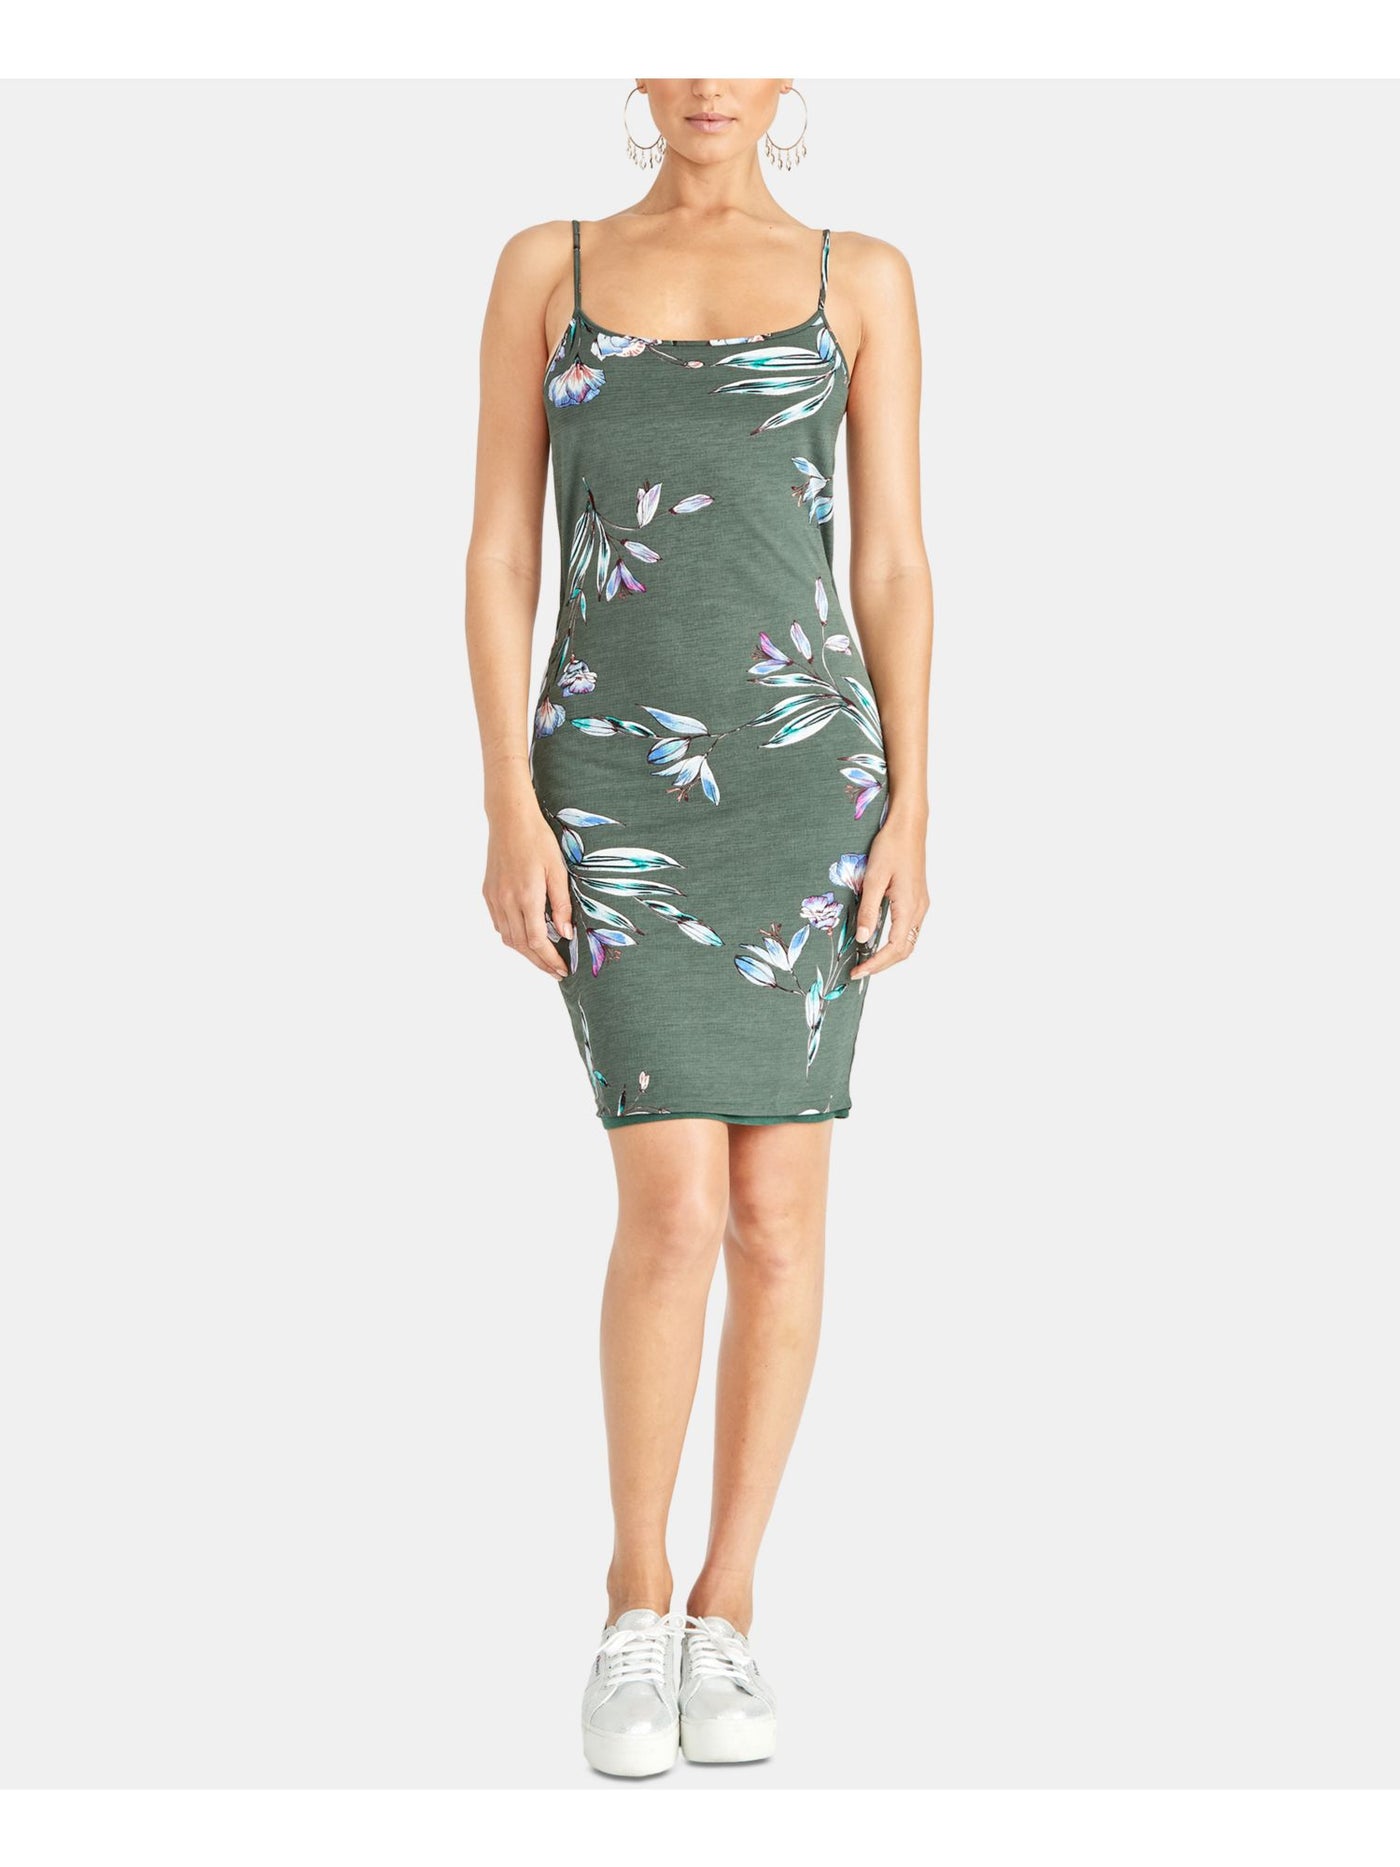 RACHEL ROY Womens Green Twist Back Floral Spaghetti Strap Scoop Neck Above The Knee Body Con Dress M